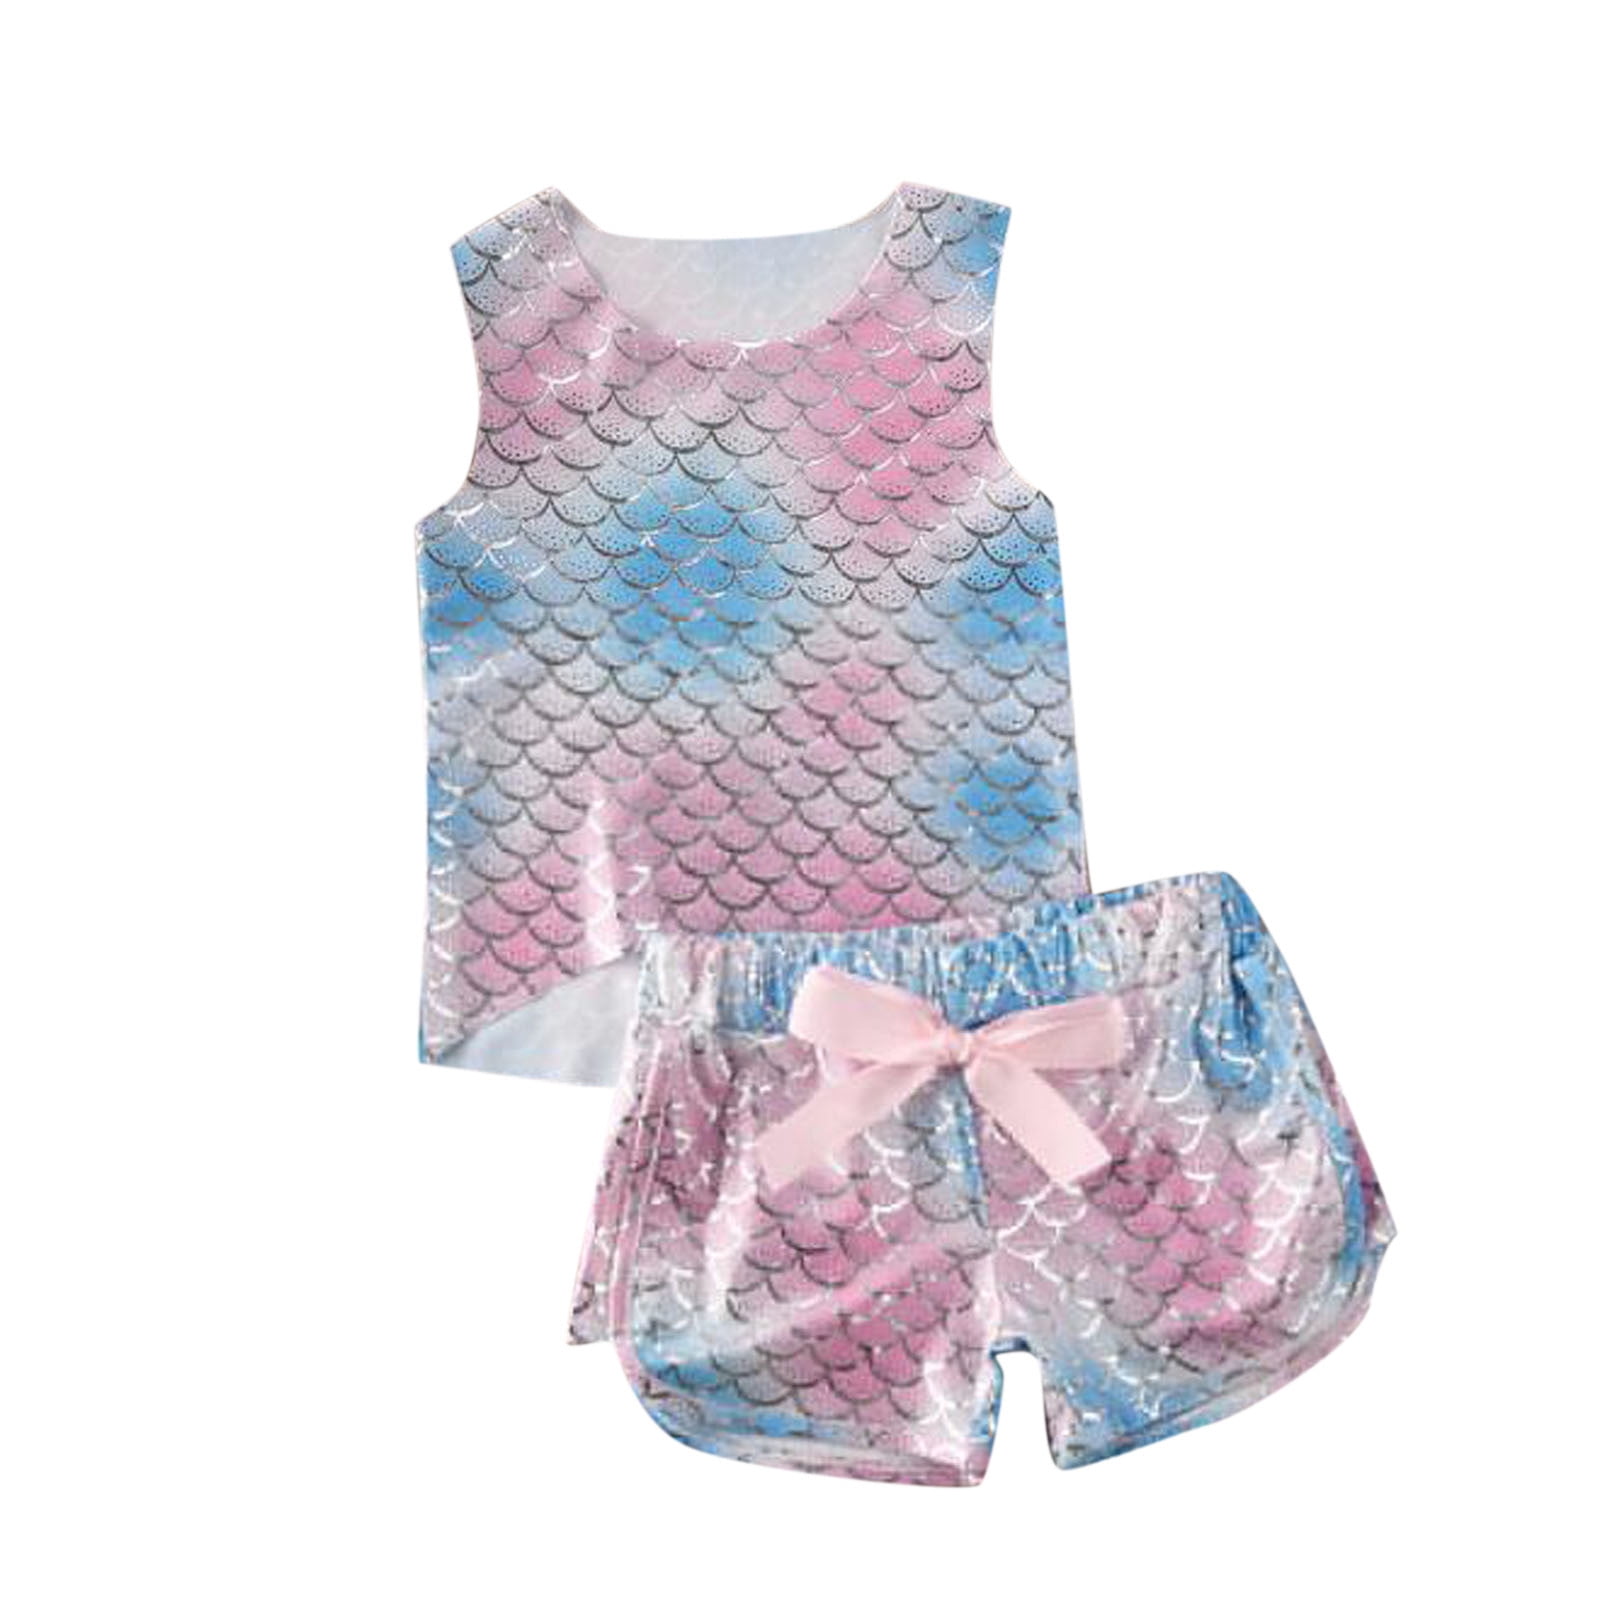 Toddler Kids Baby Girl Summer Tie-Dye Mermaid Squama Tops+Shorts Outfits 2PC Set